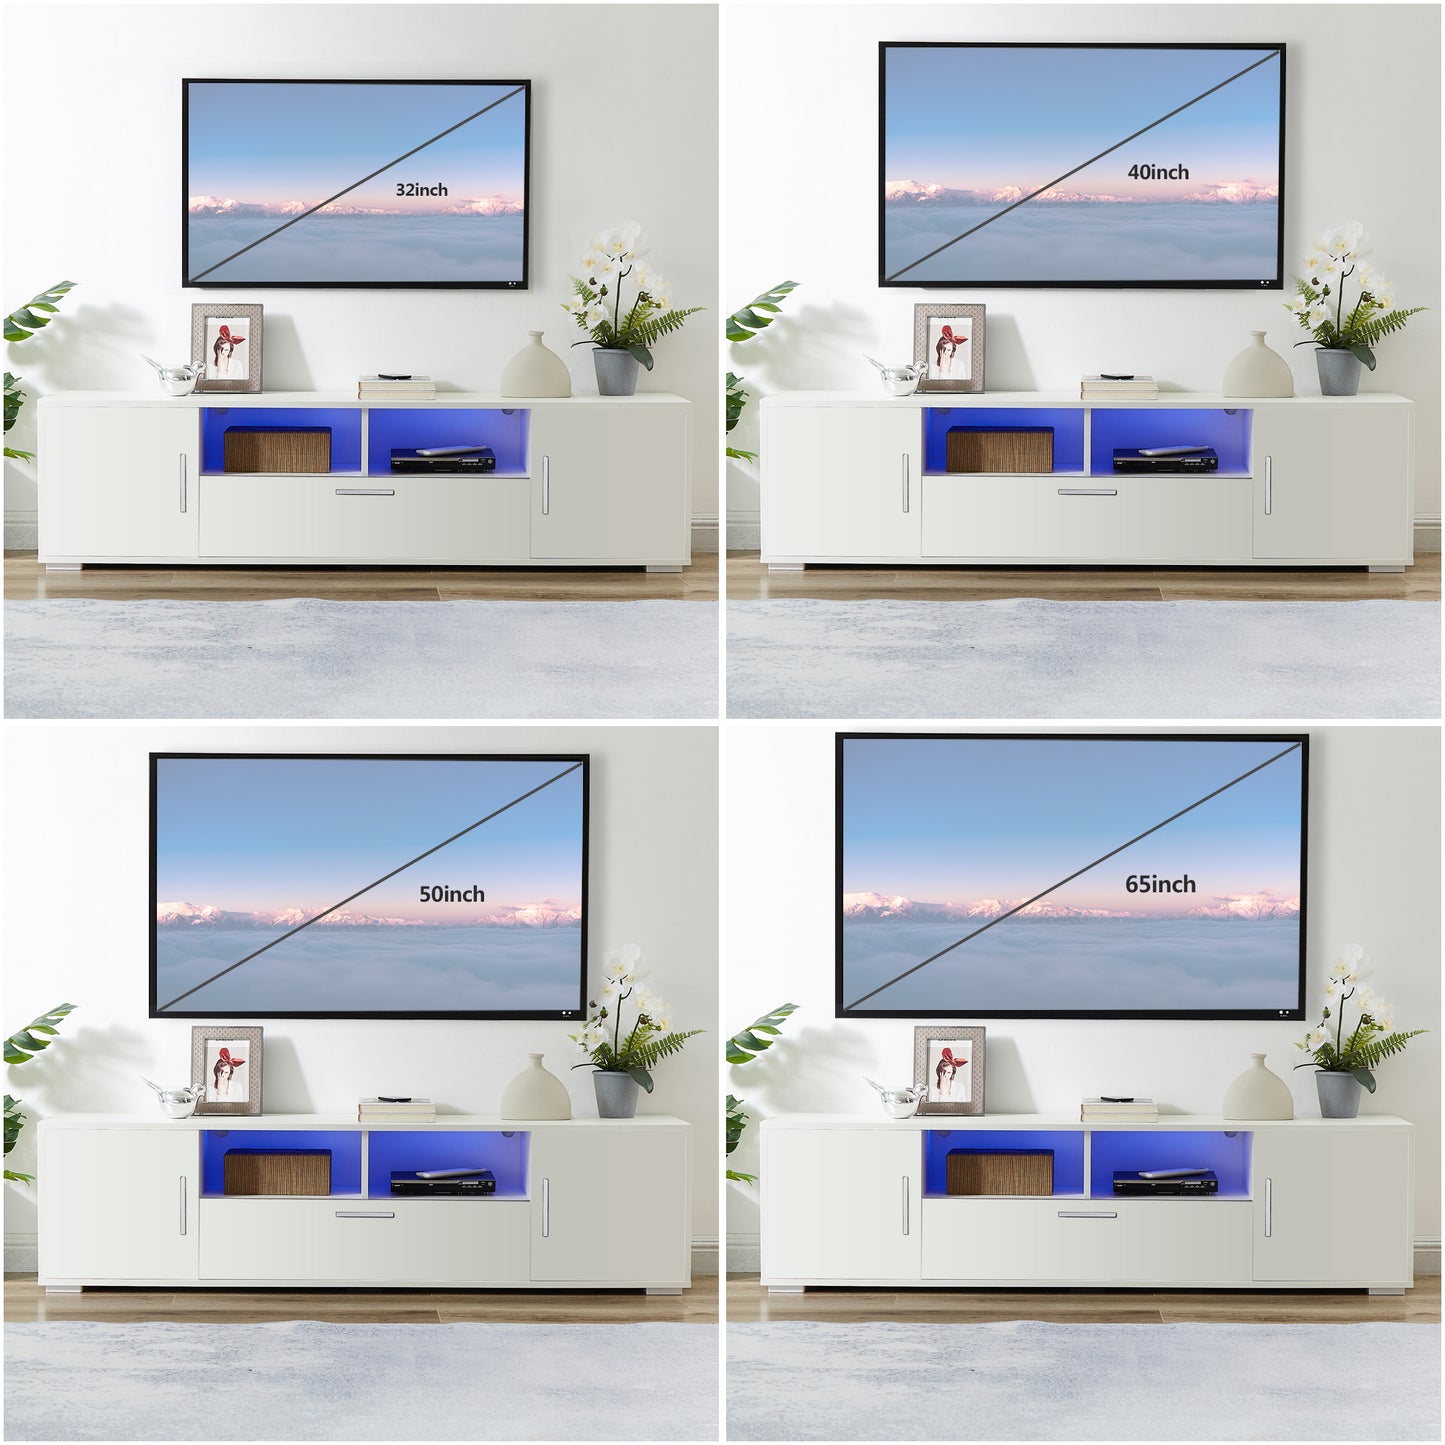 QUICK ASSEMBLE WHITE modern TV Stand, only 20 minutes to finish assemble, with LED Lights, high glossy front TV Cabinet, can be assembled in Lounge Room, Living Room or Bedroom, color:WHITE